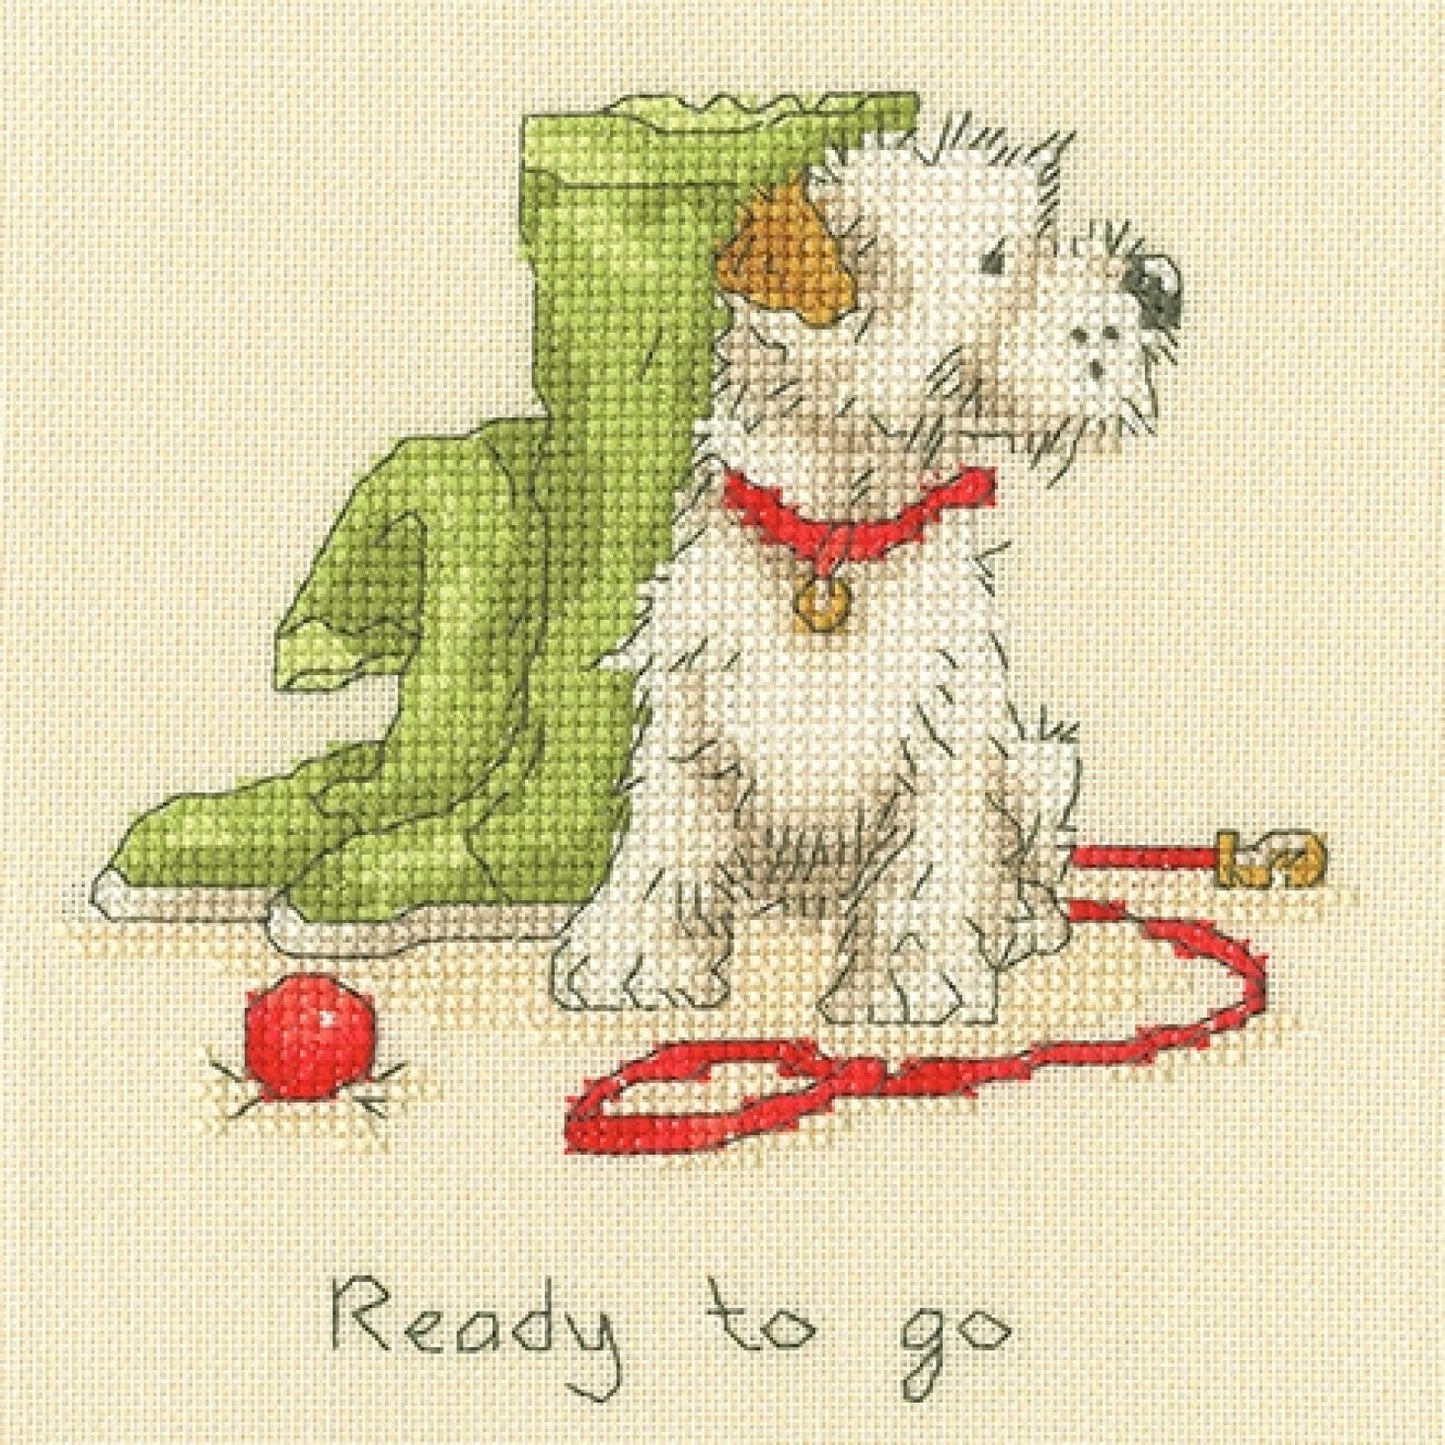 Jack Russell is Ready to Go! - Counted Cross Stitch Kit by Bothy Threads